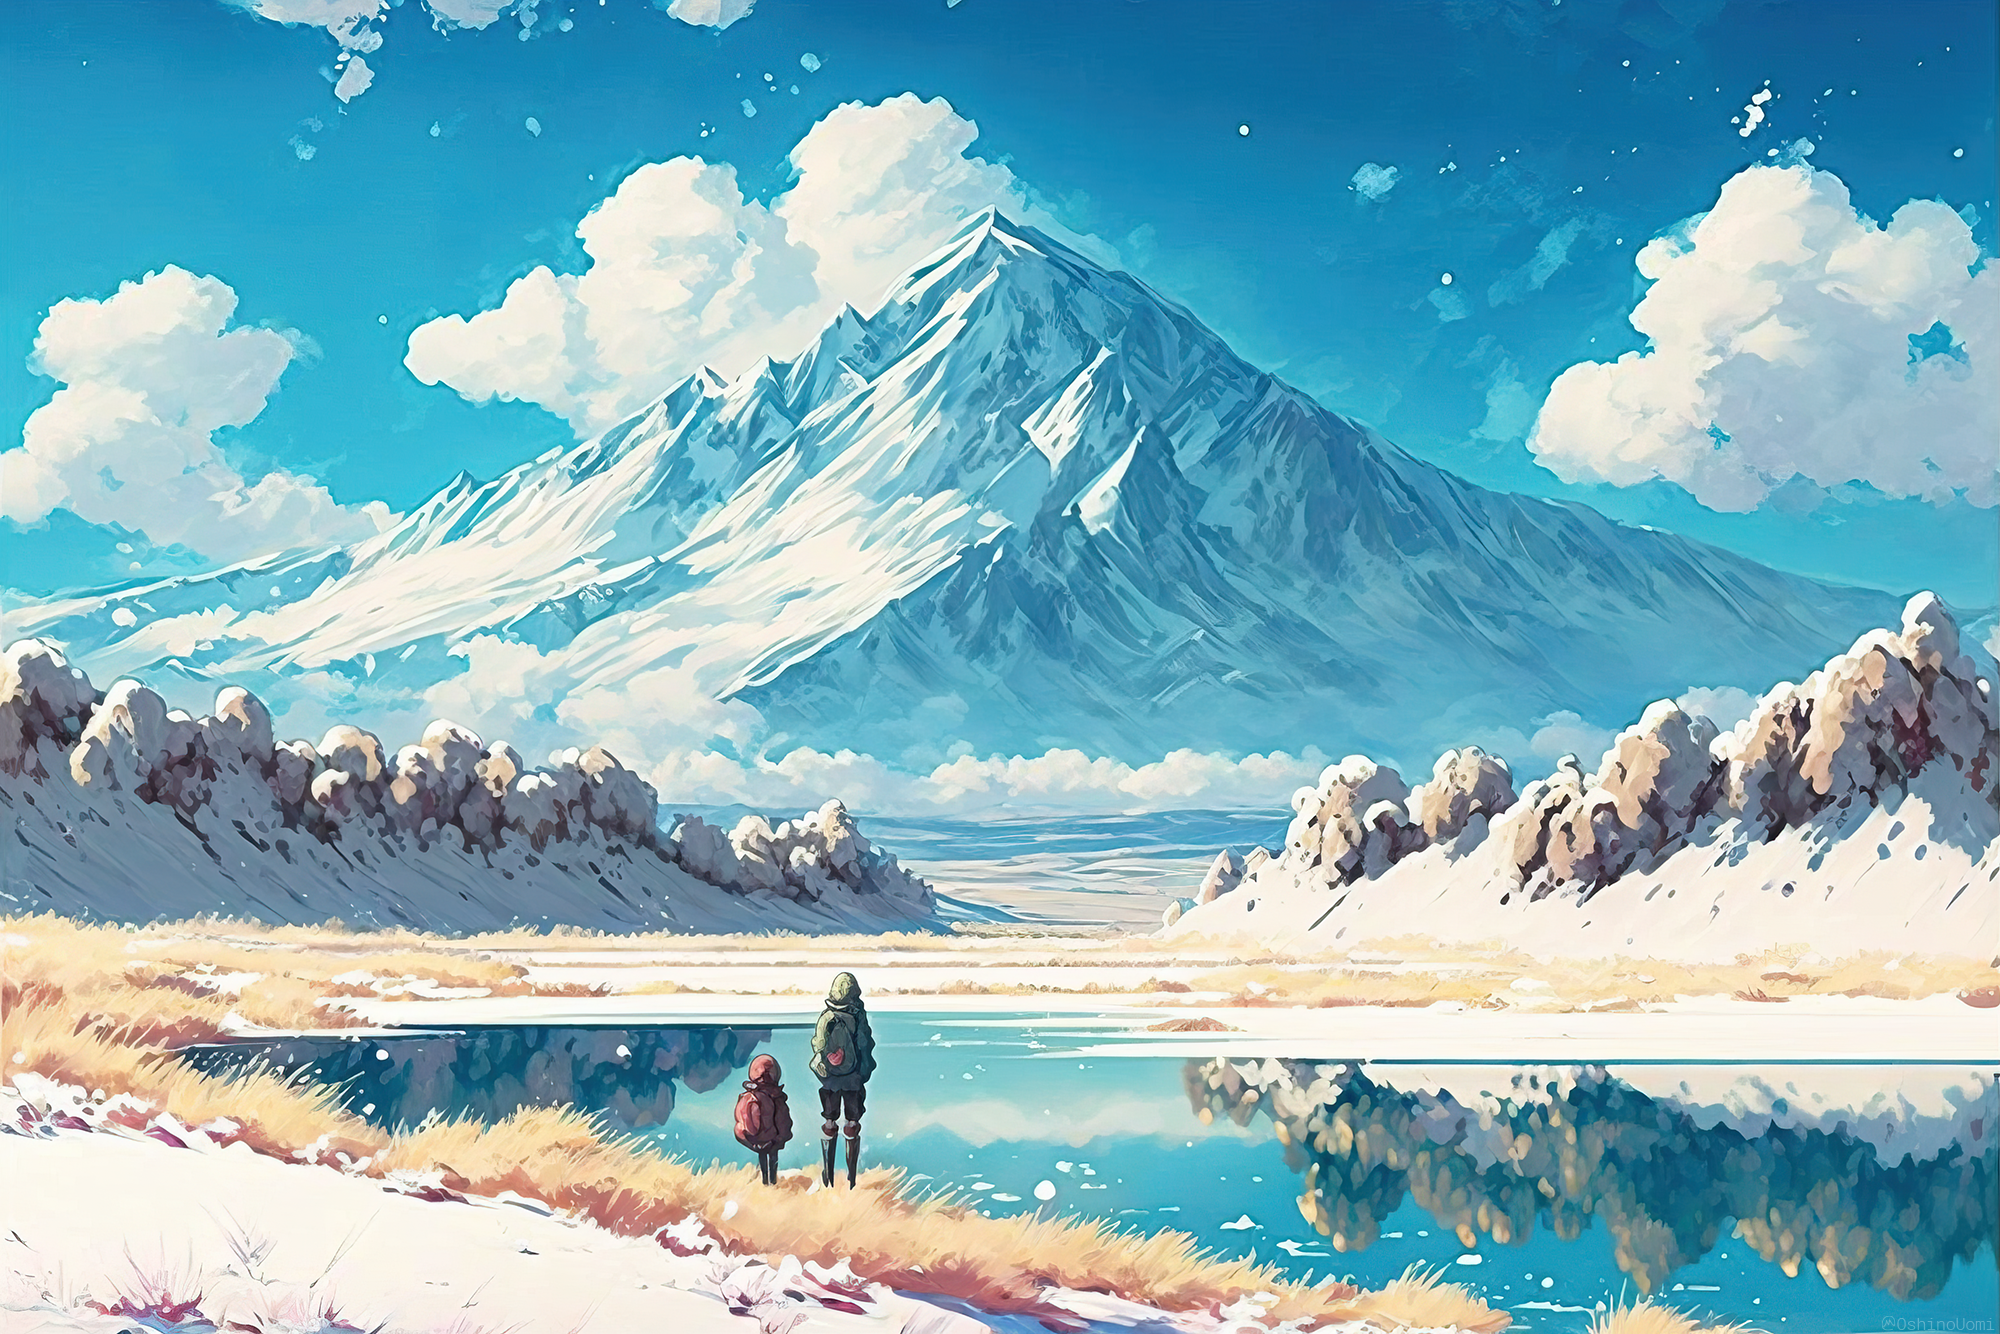 General 2000x1334 Uomi AI art illustration landscape clouds mountains lake ice water reflection artwork